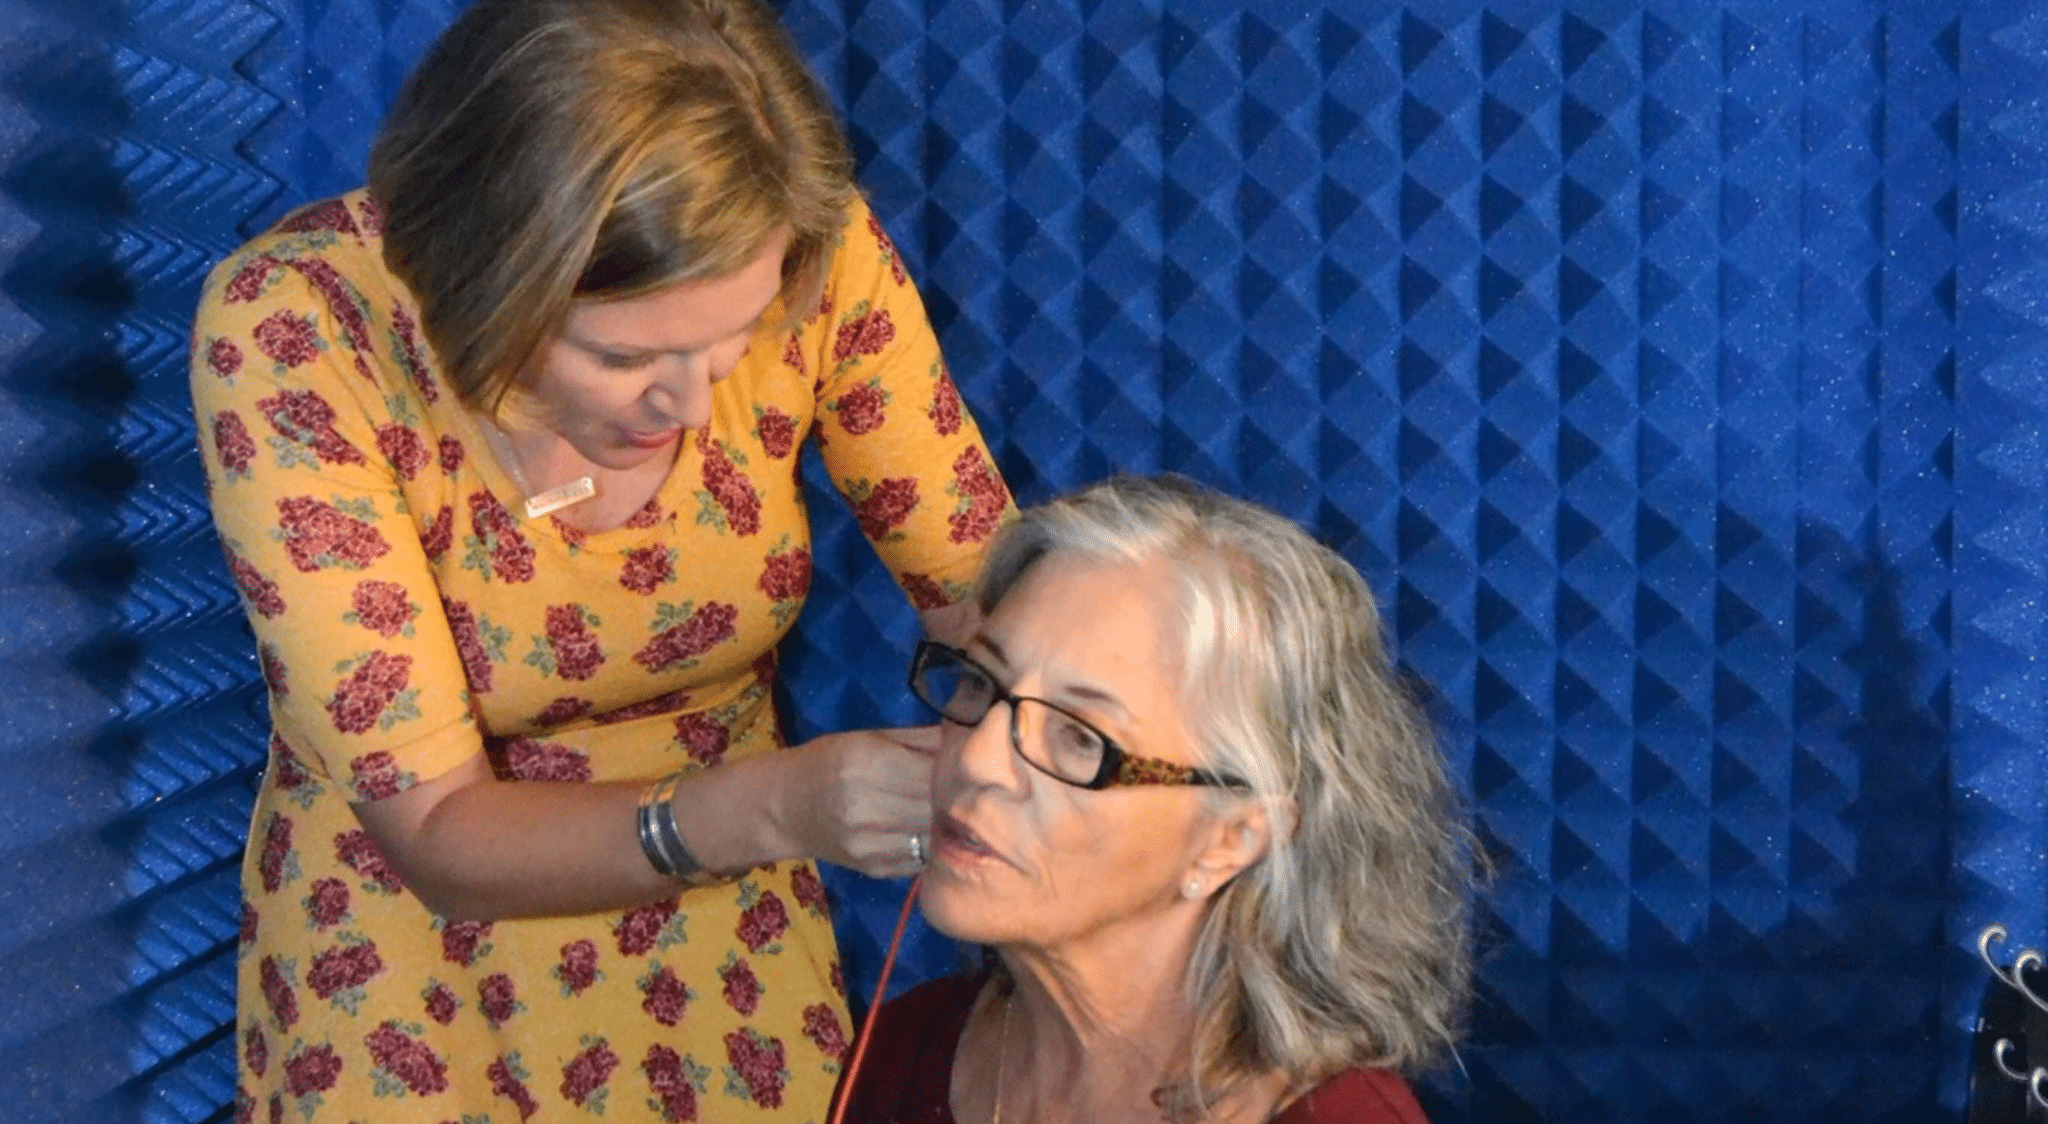 Audiologist conducting a hearing evaluation on an elderly woman inside a WhisperRoom audiometric booth, featuring blue acoustic foam on the interior walls.